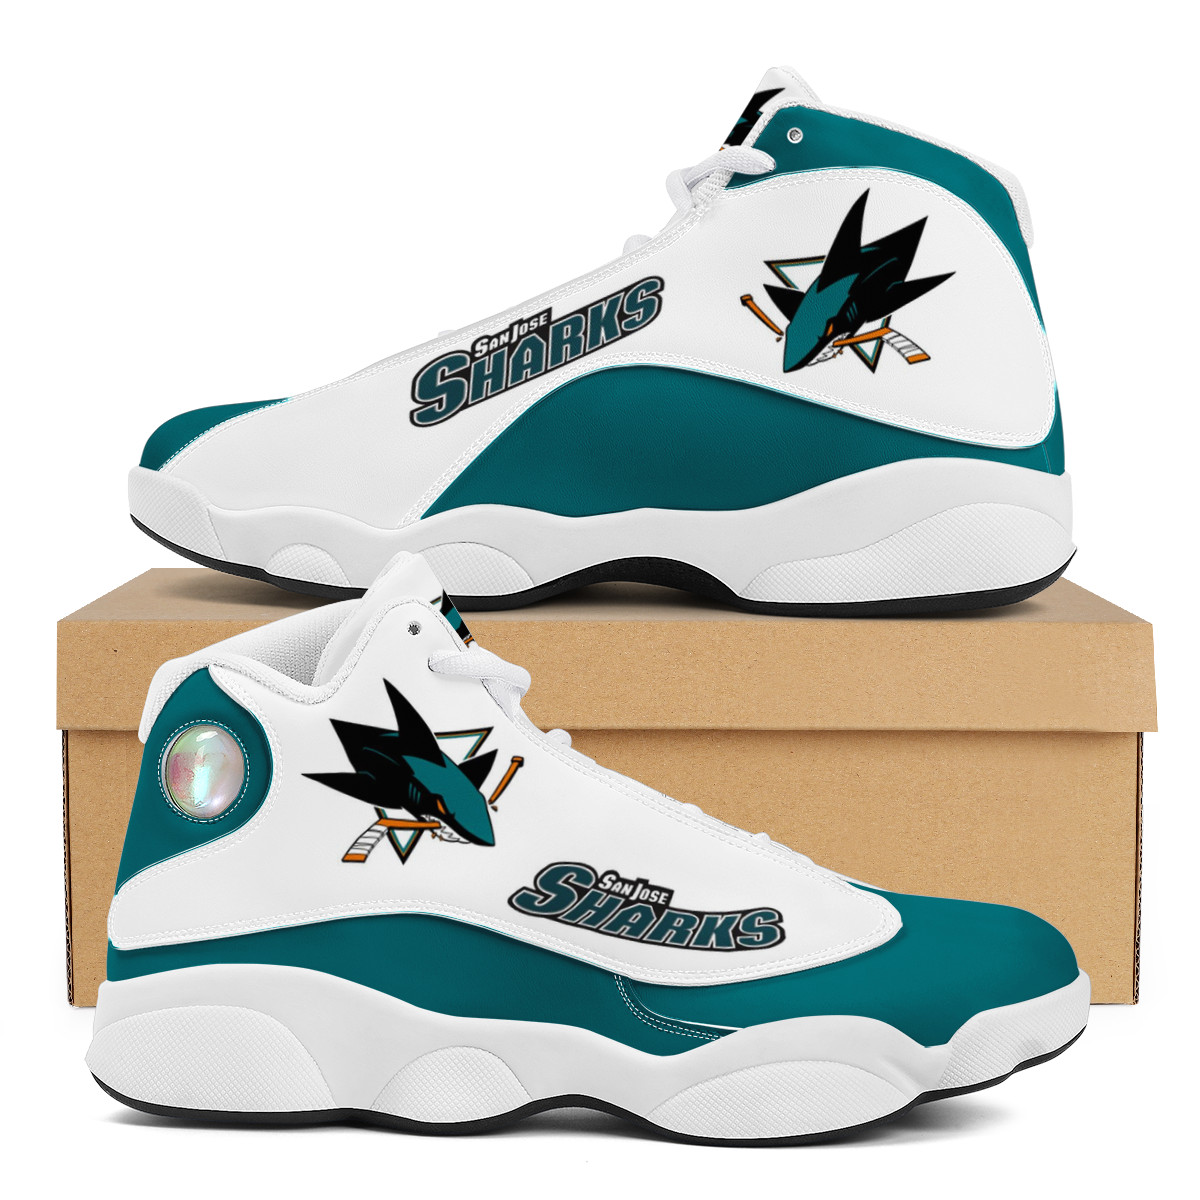 Women's San Jose Sharks Limited Edition JD13 Sneakers 003